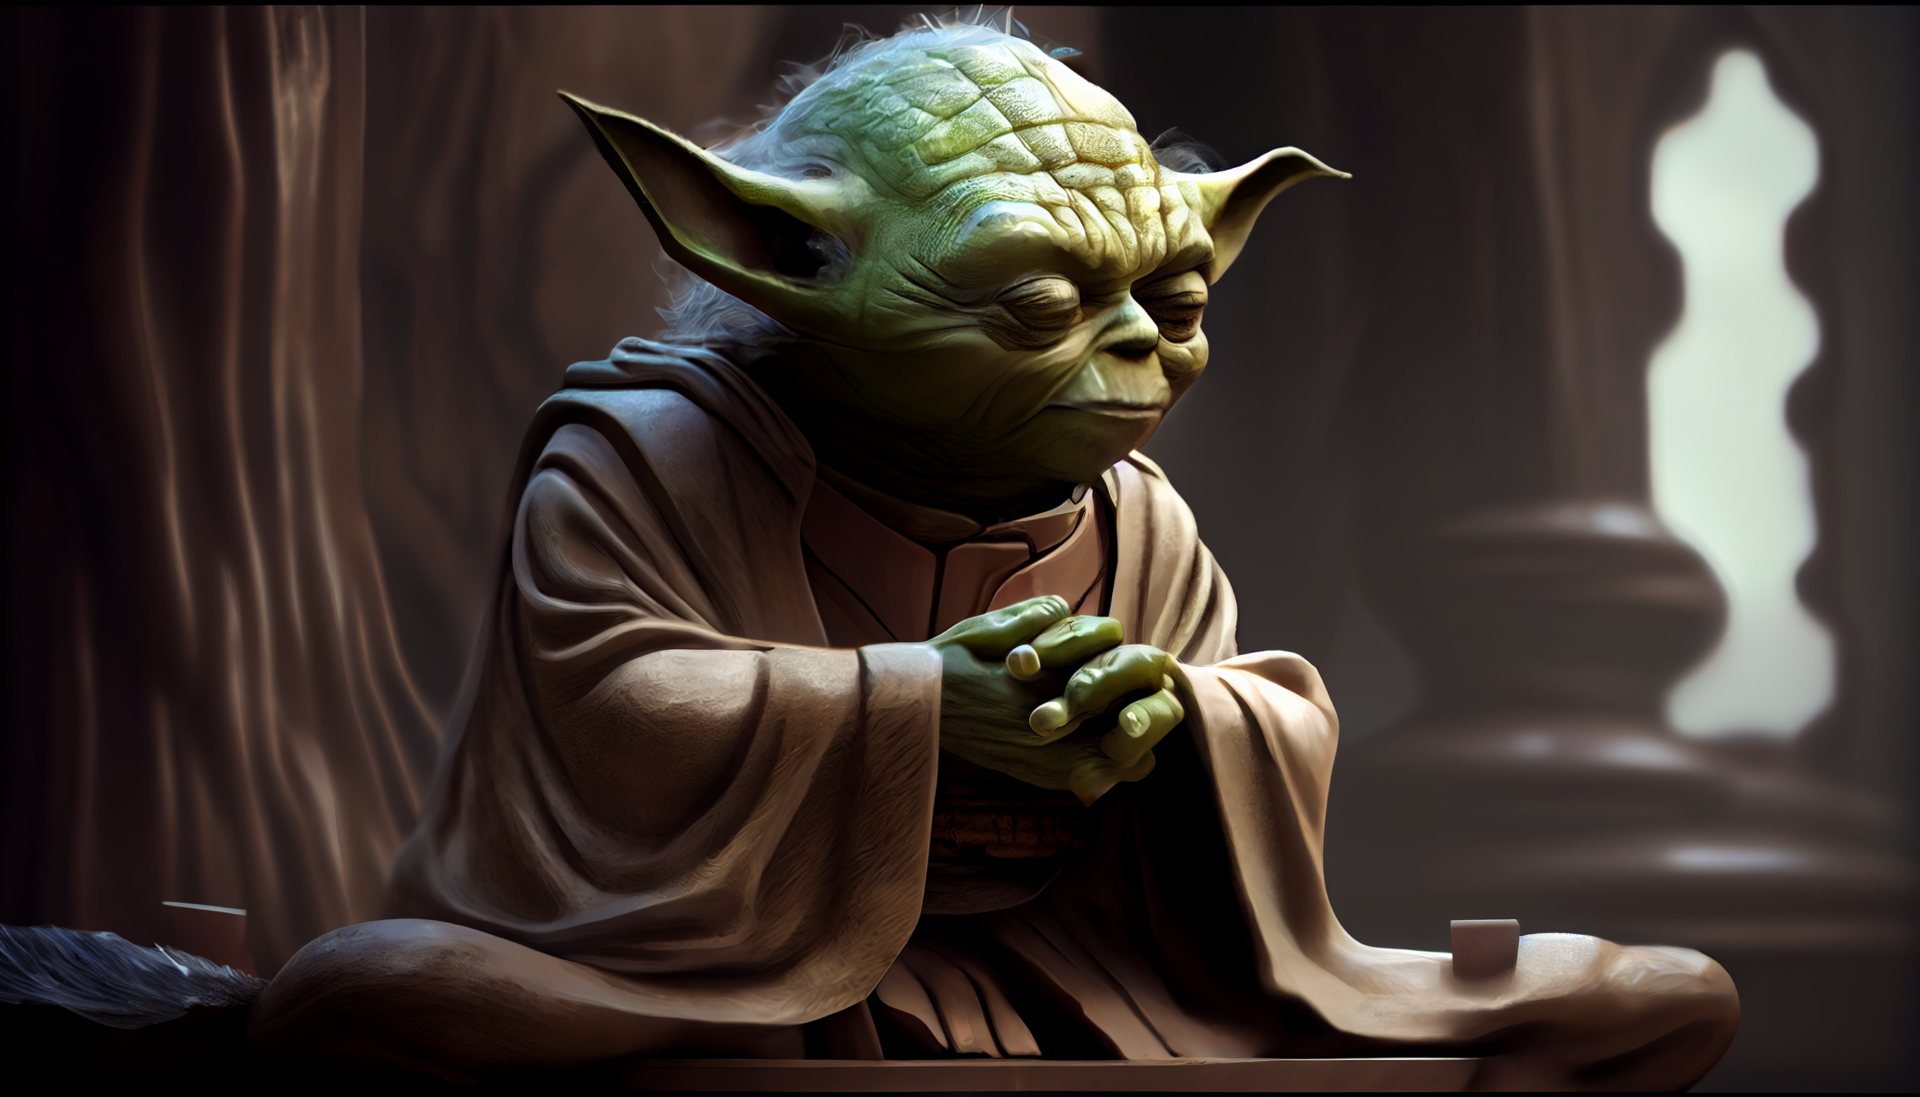 Get Closer to the Force: Star Wars Yoda Desktop Wallpapers That Will Amaze You